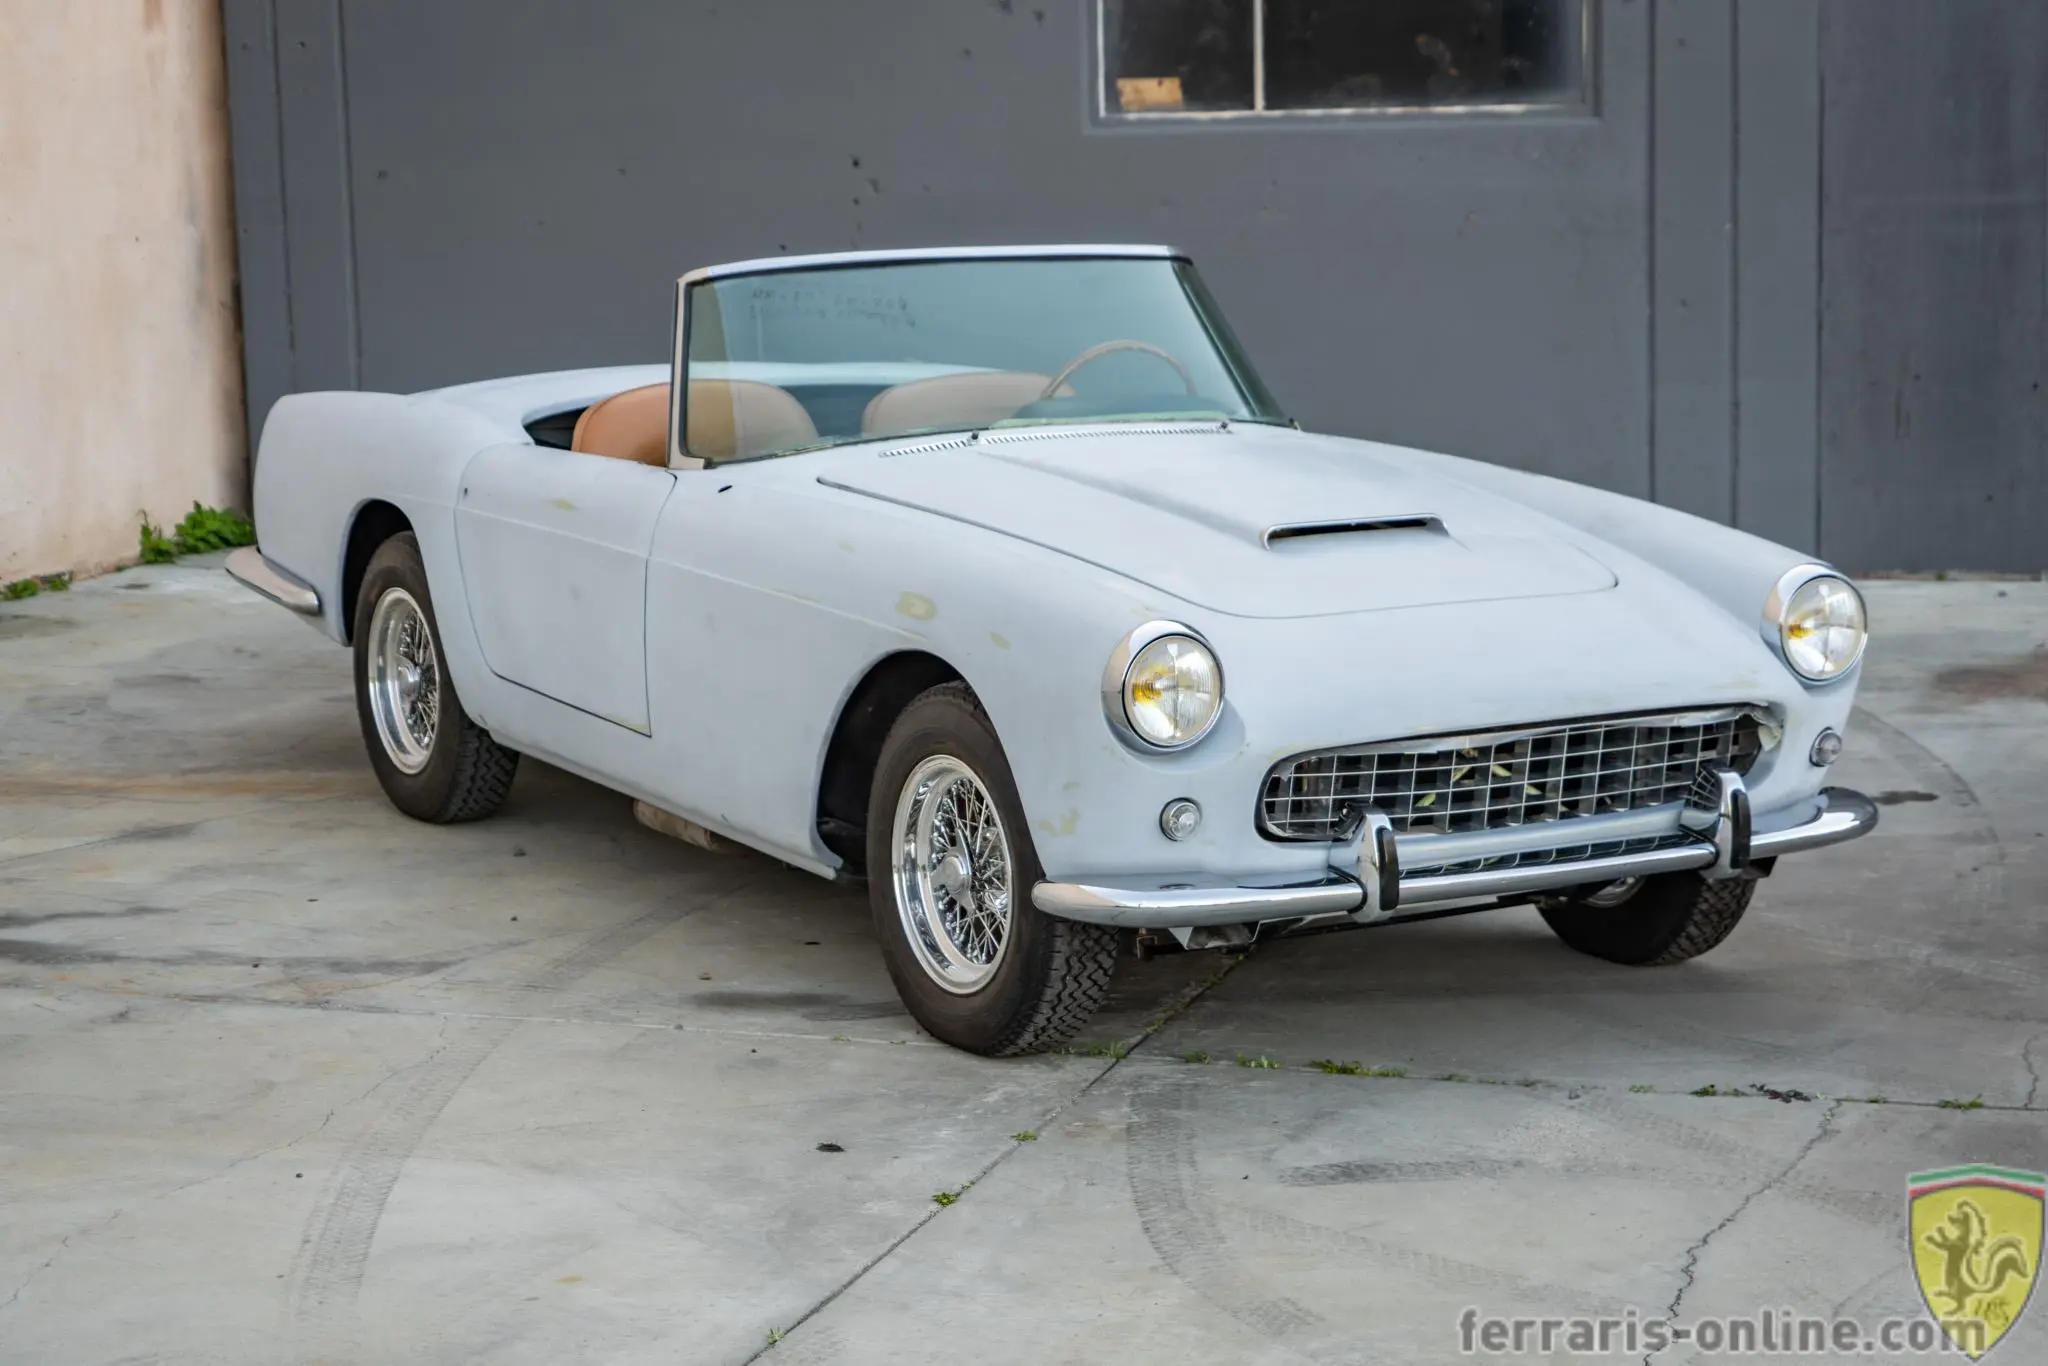 ferrari 250 cabriolet for sale - How much is a Ferrari 250 Cabriolet worth